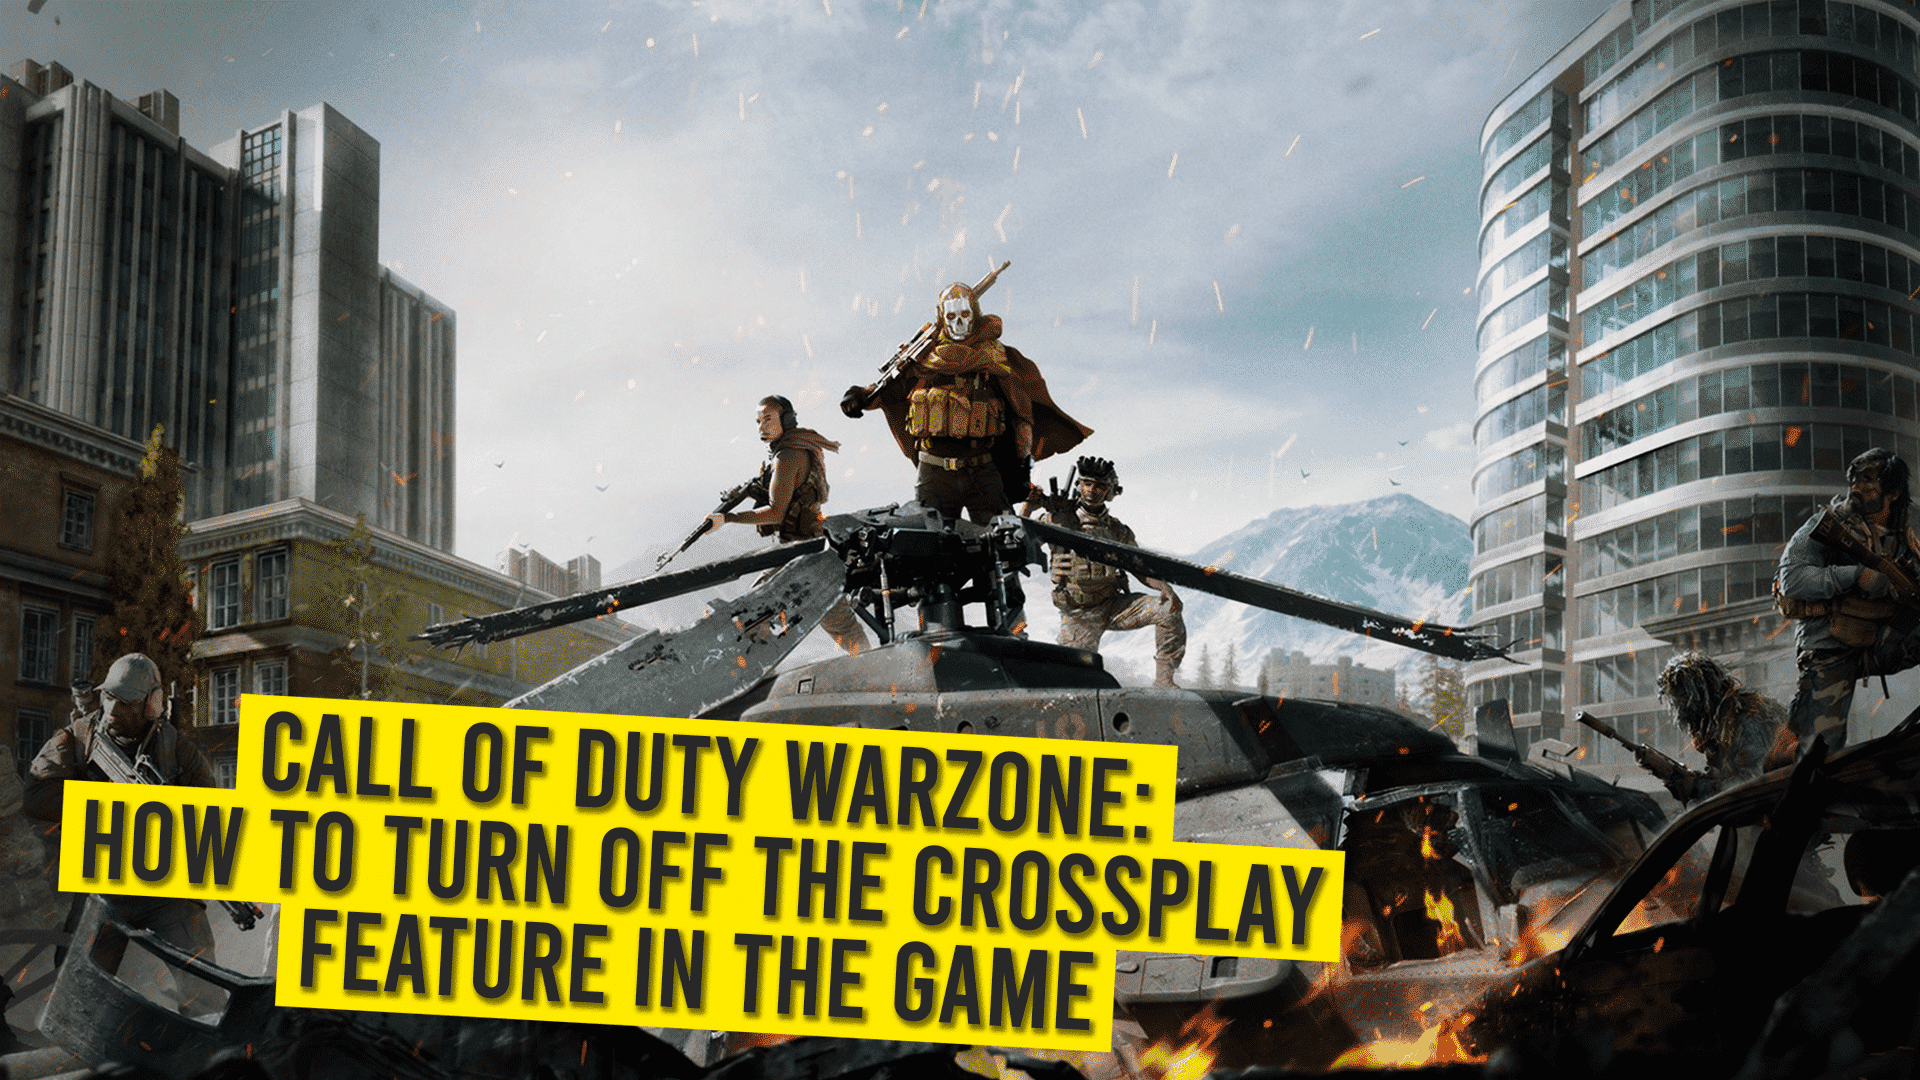 Call Of Duty Warzone: How To Turn Off The Crossplay Feature In The Game